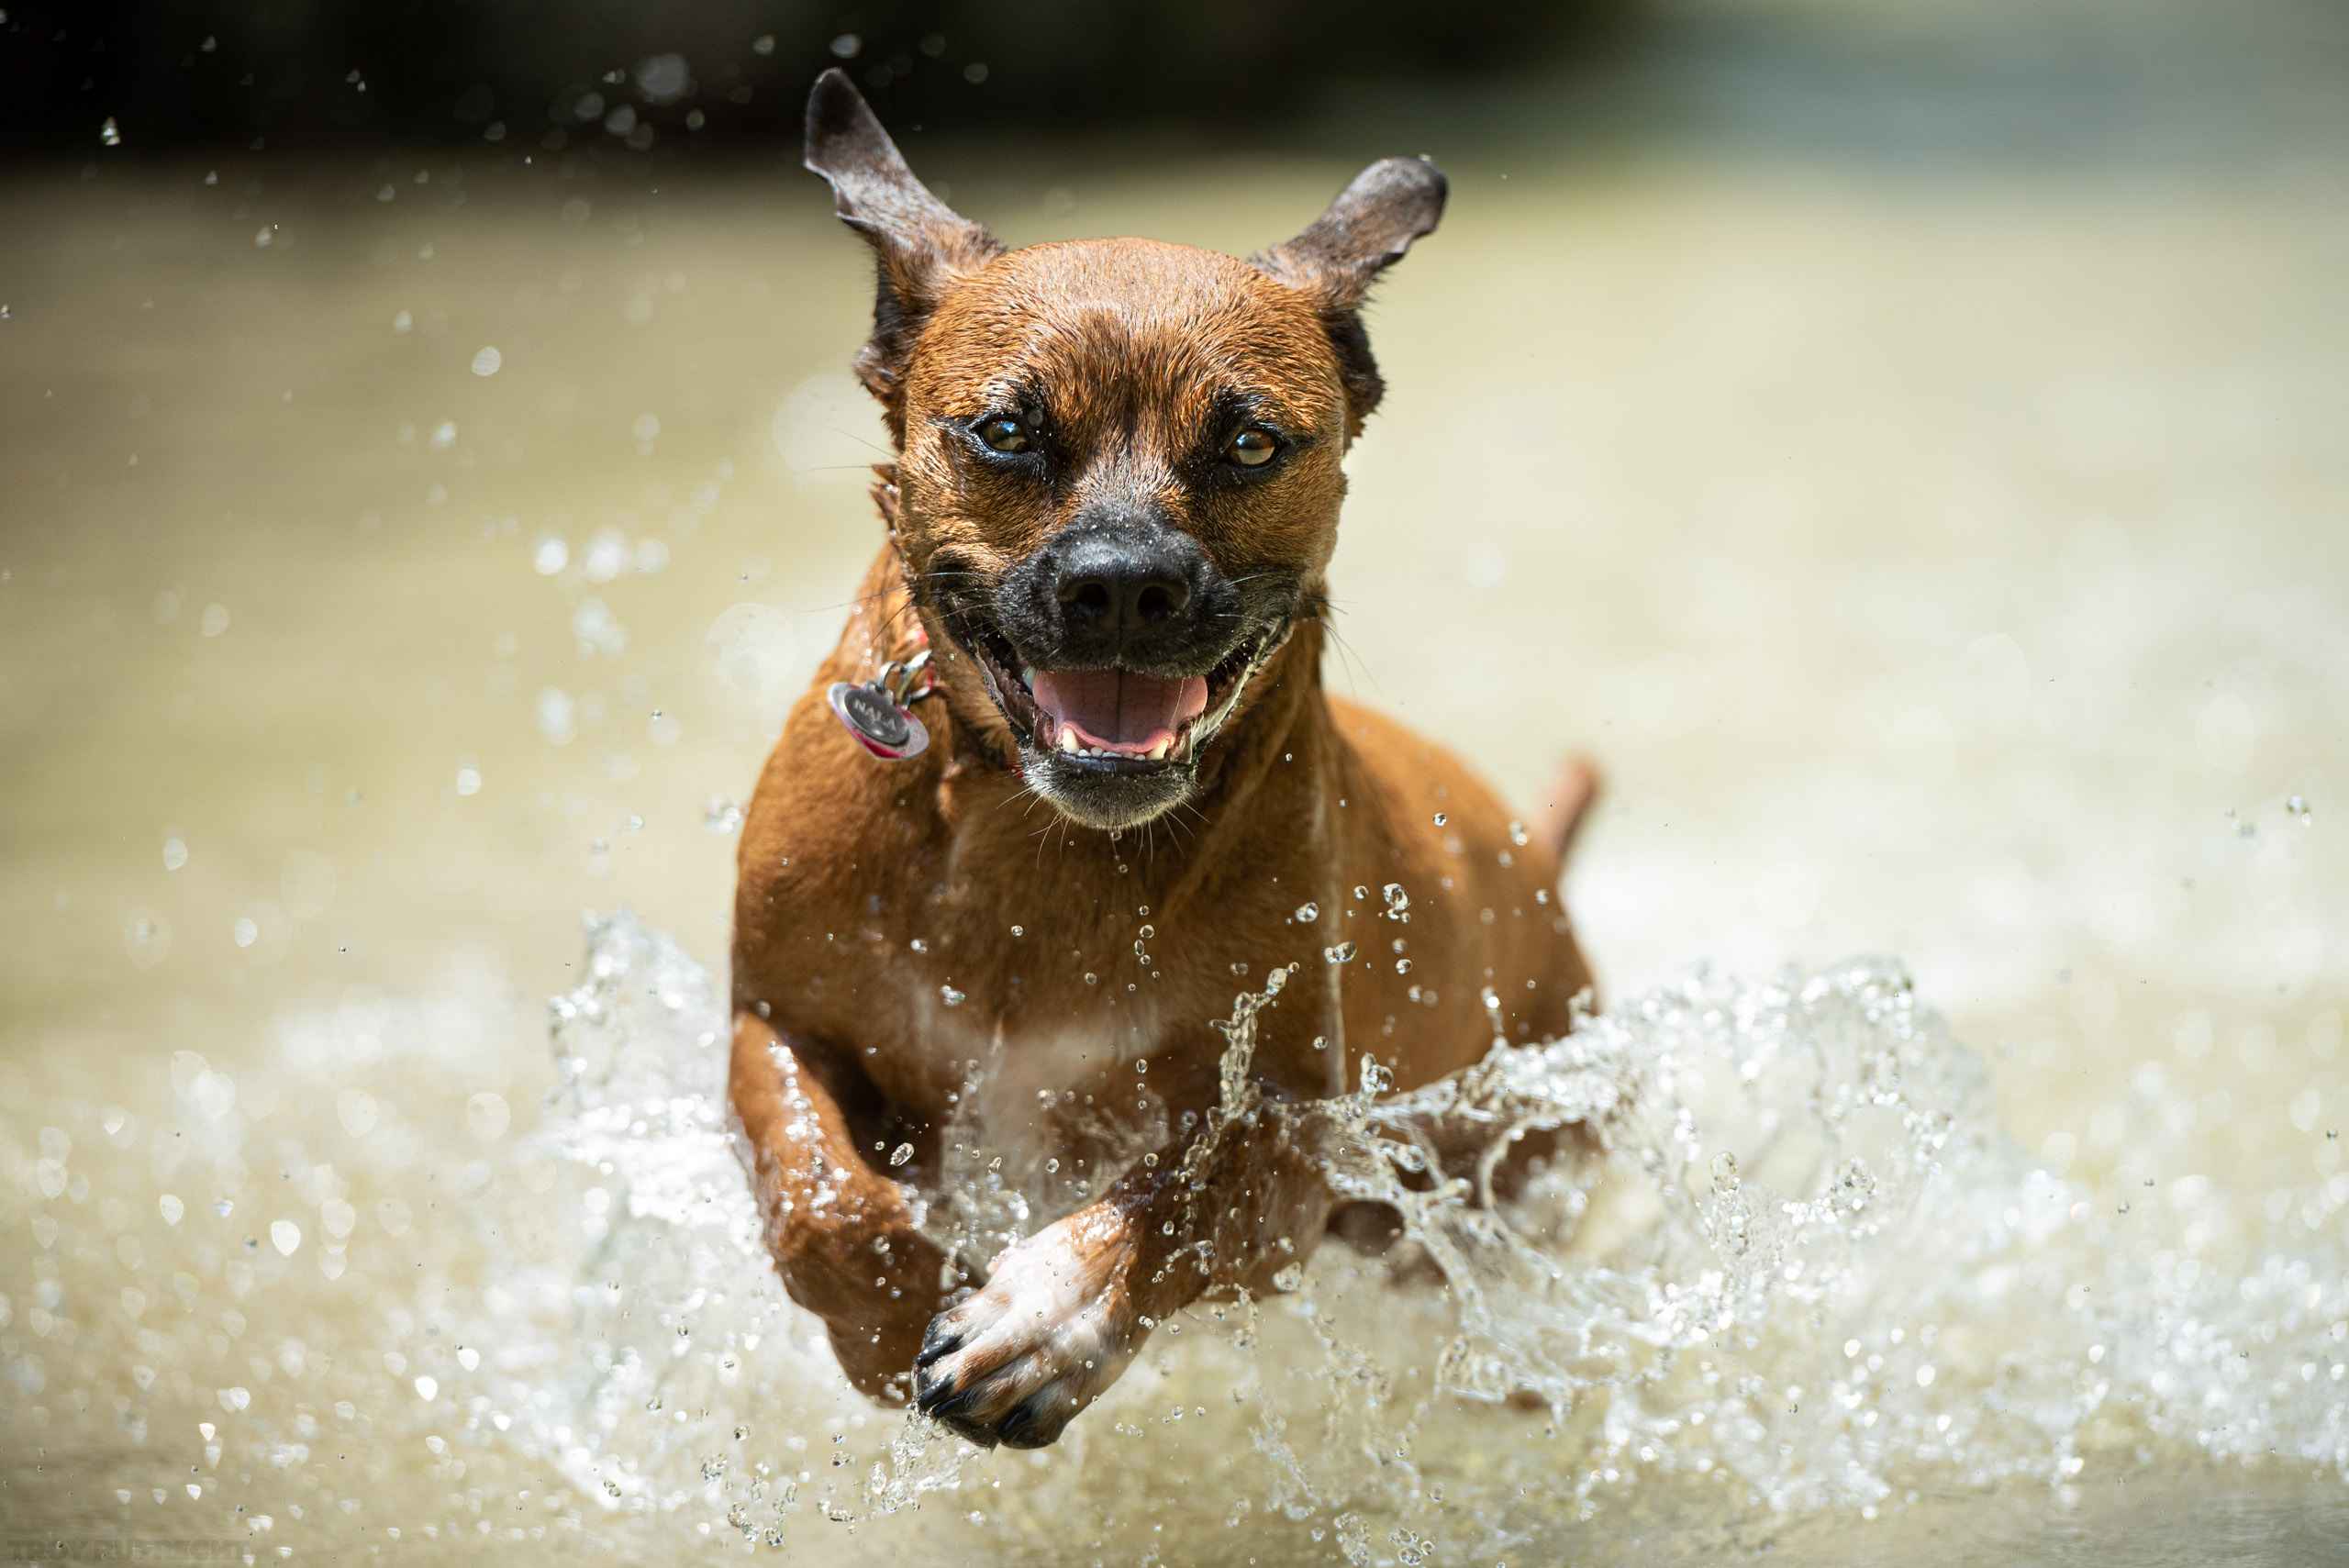 Dog-Water-Running-Epic-Portrait-Action-Pets